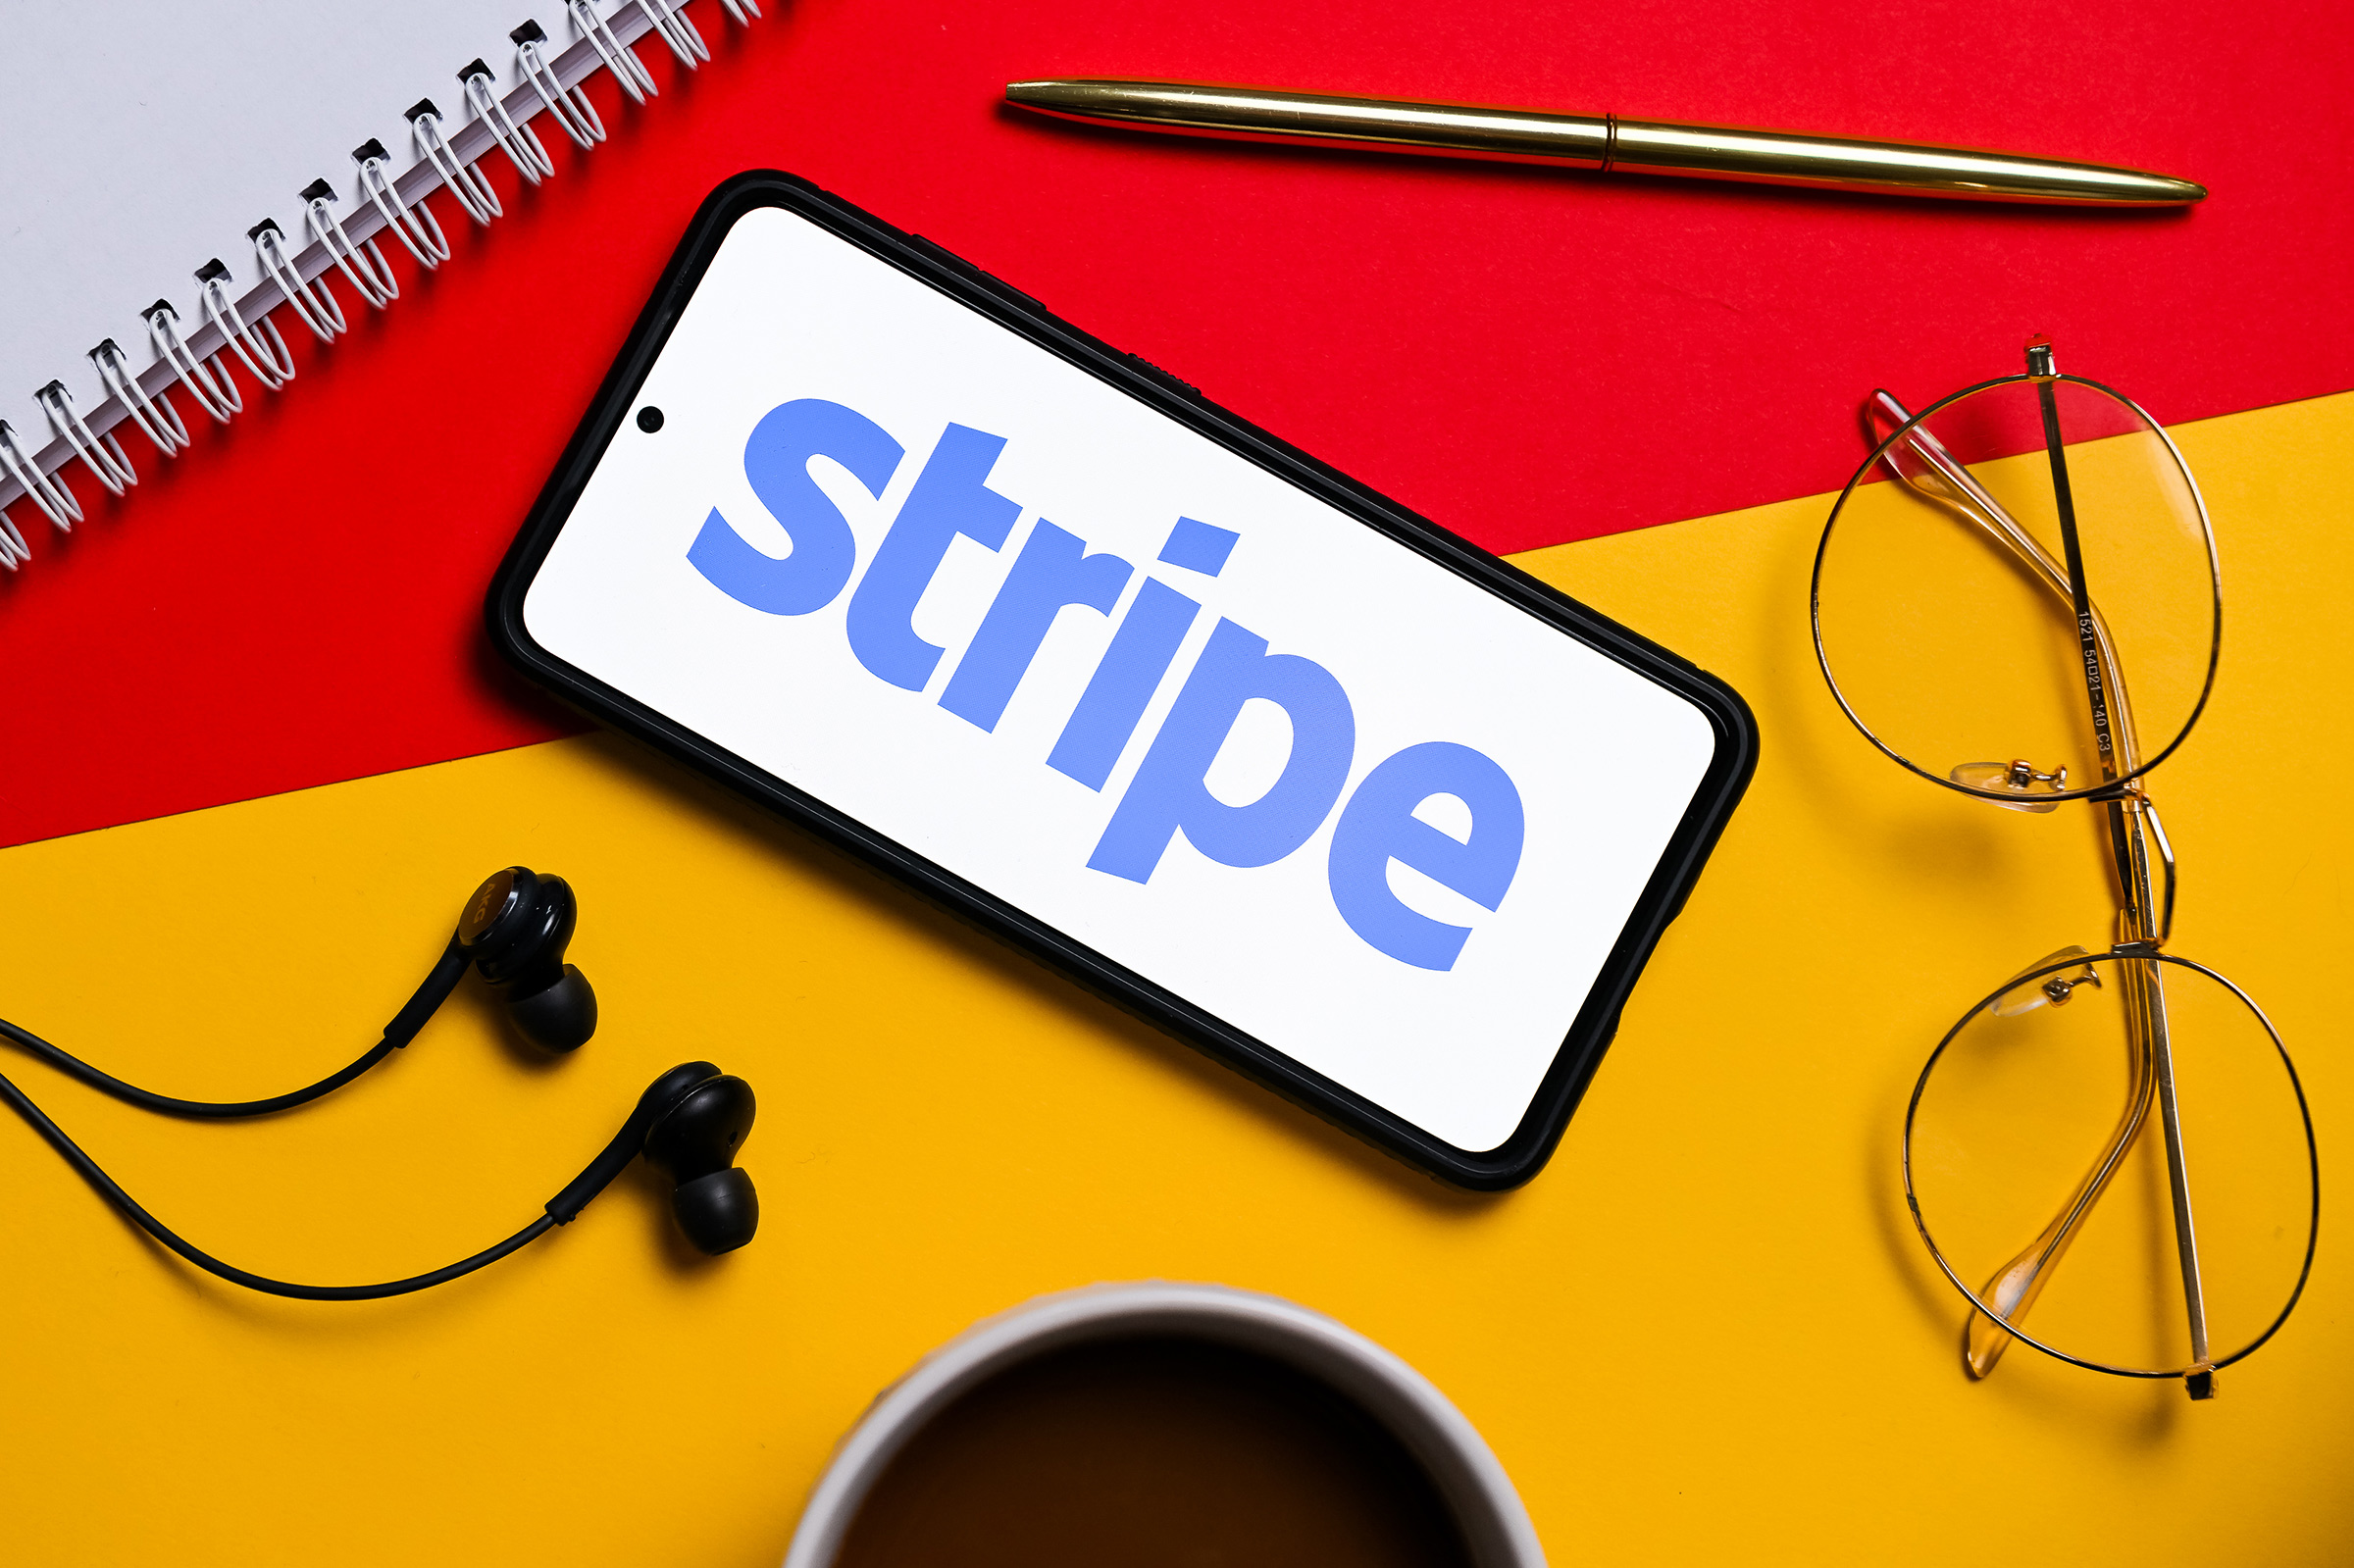 Stripe is a financial services and software company. (Mateusz Slodkowski—SOPA Images/LightRocket/Getty Images)